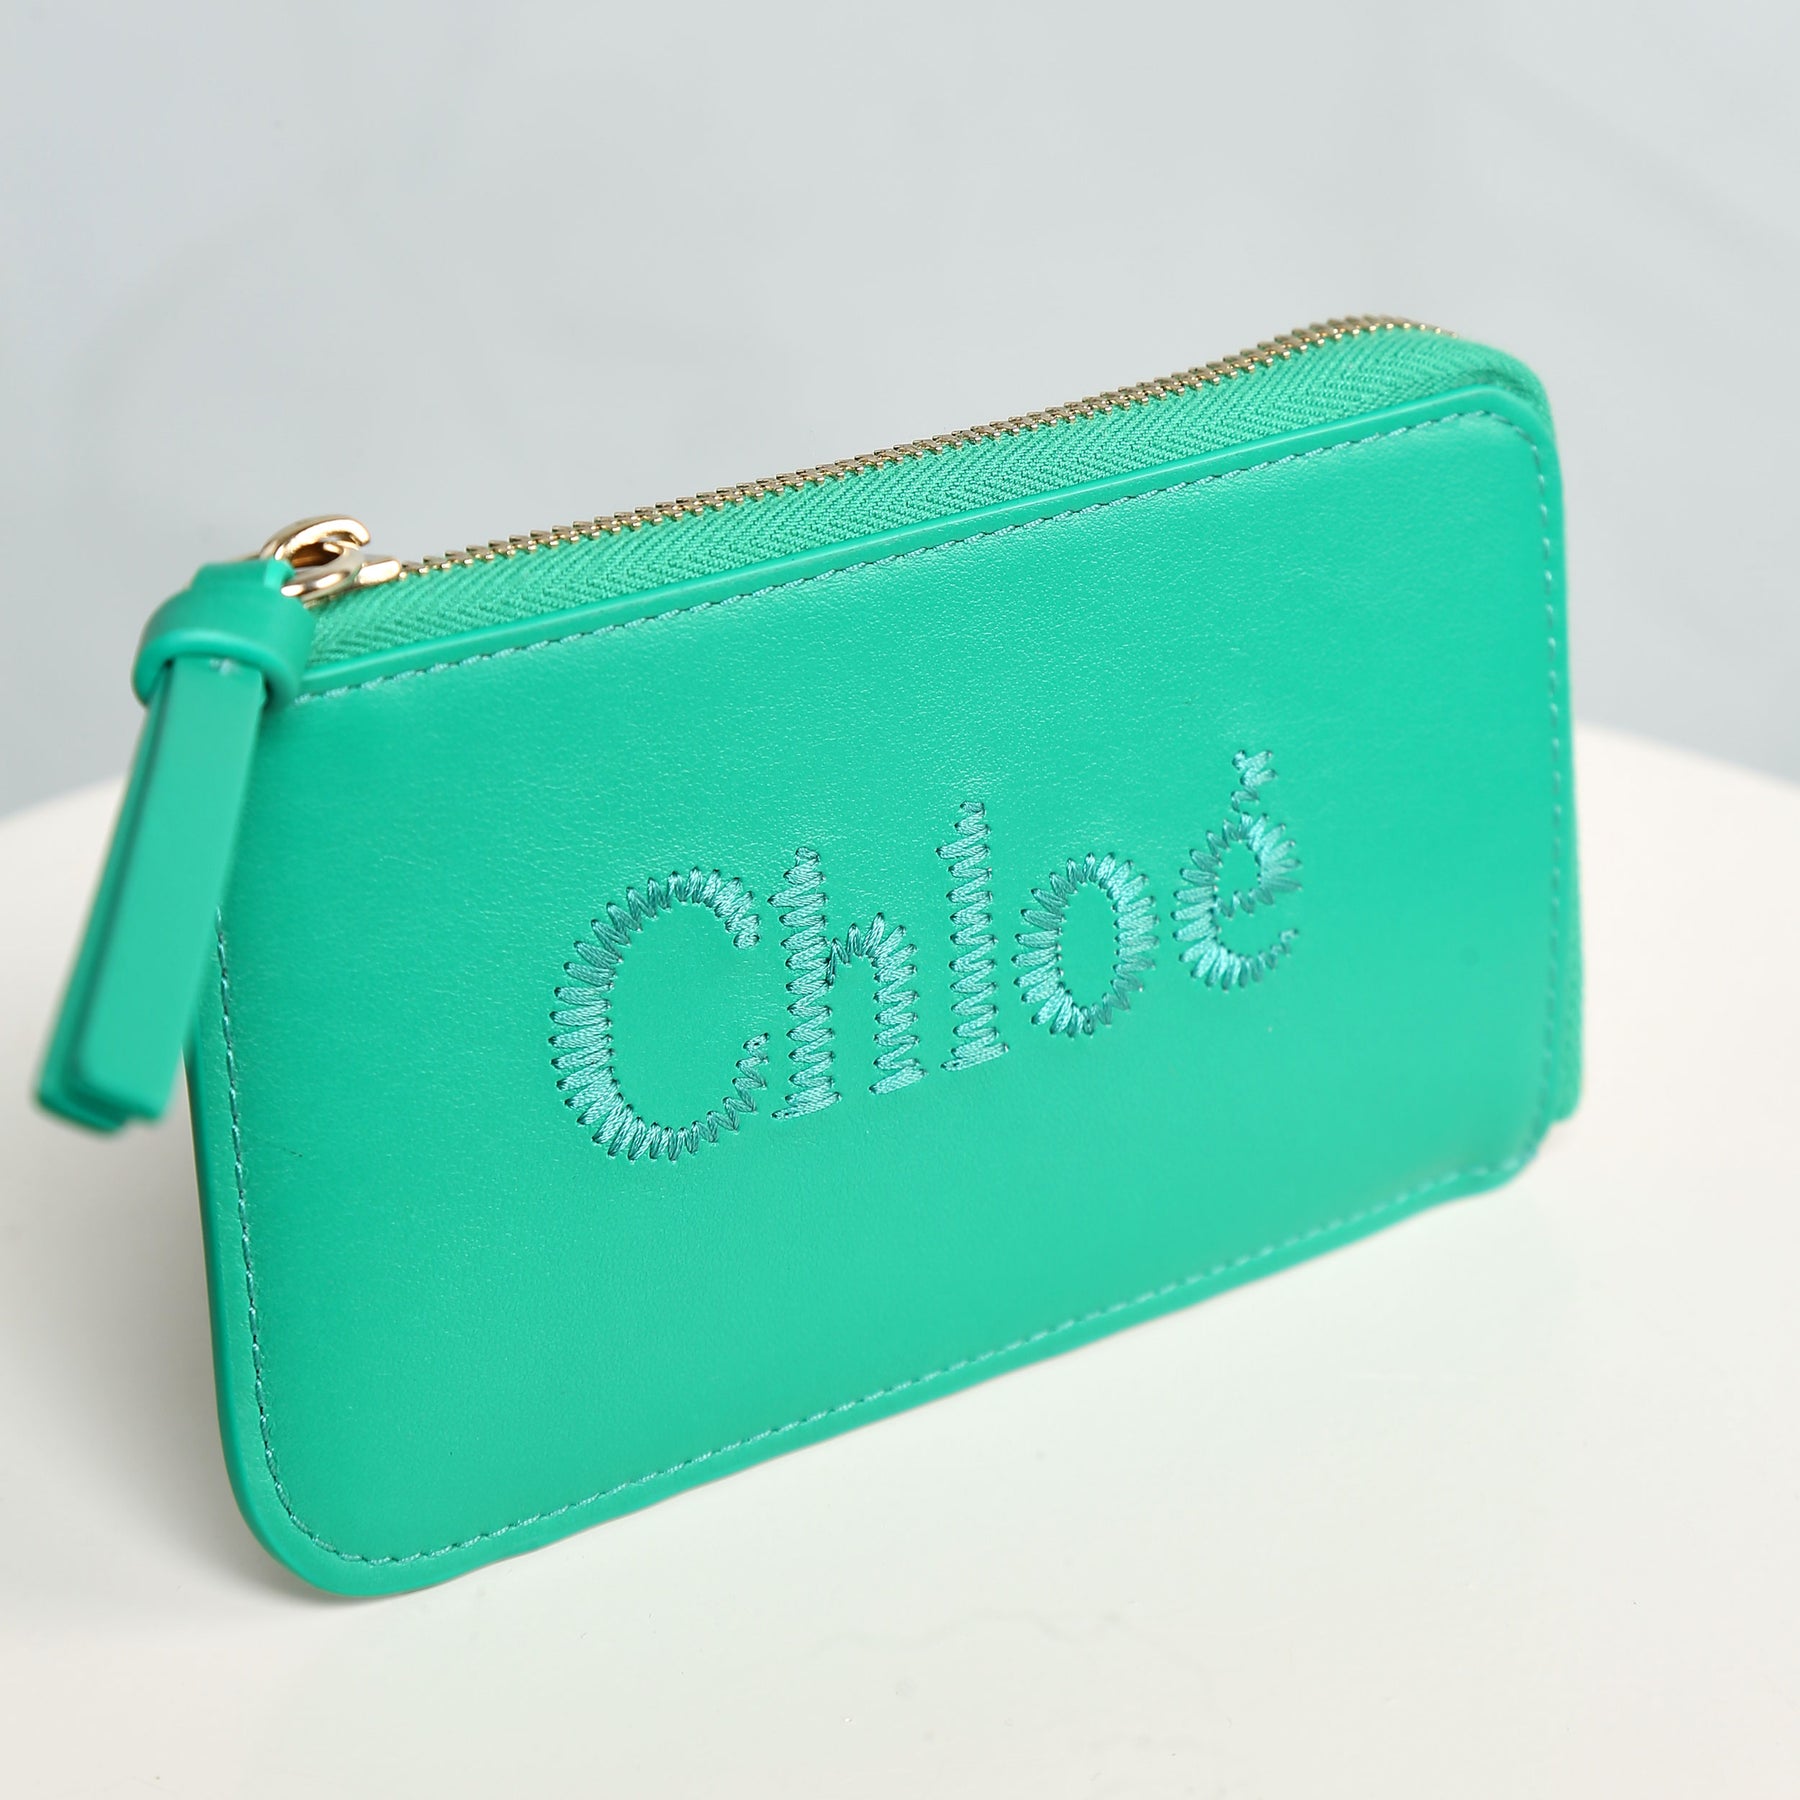 Chloe Handbag Best Price In Pakistan | Rs 6500 | find the best quality of  Handbags,hand Bag, Hand Bags, Ladies Bags, Side Bags, Clutches, Leather Bags,  Purse, Fashion Bags, Tote Bags, Branded